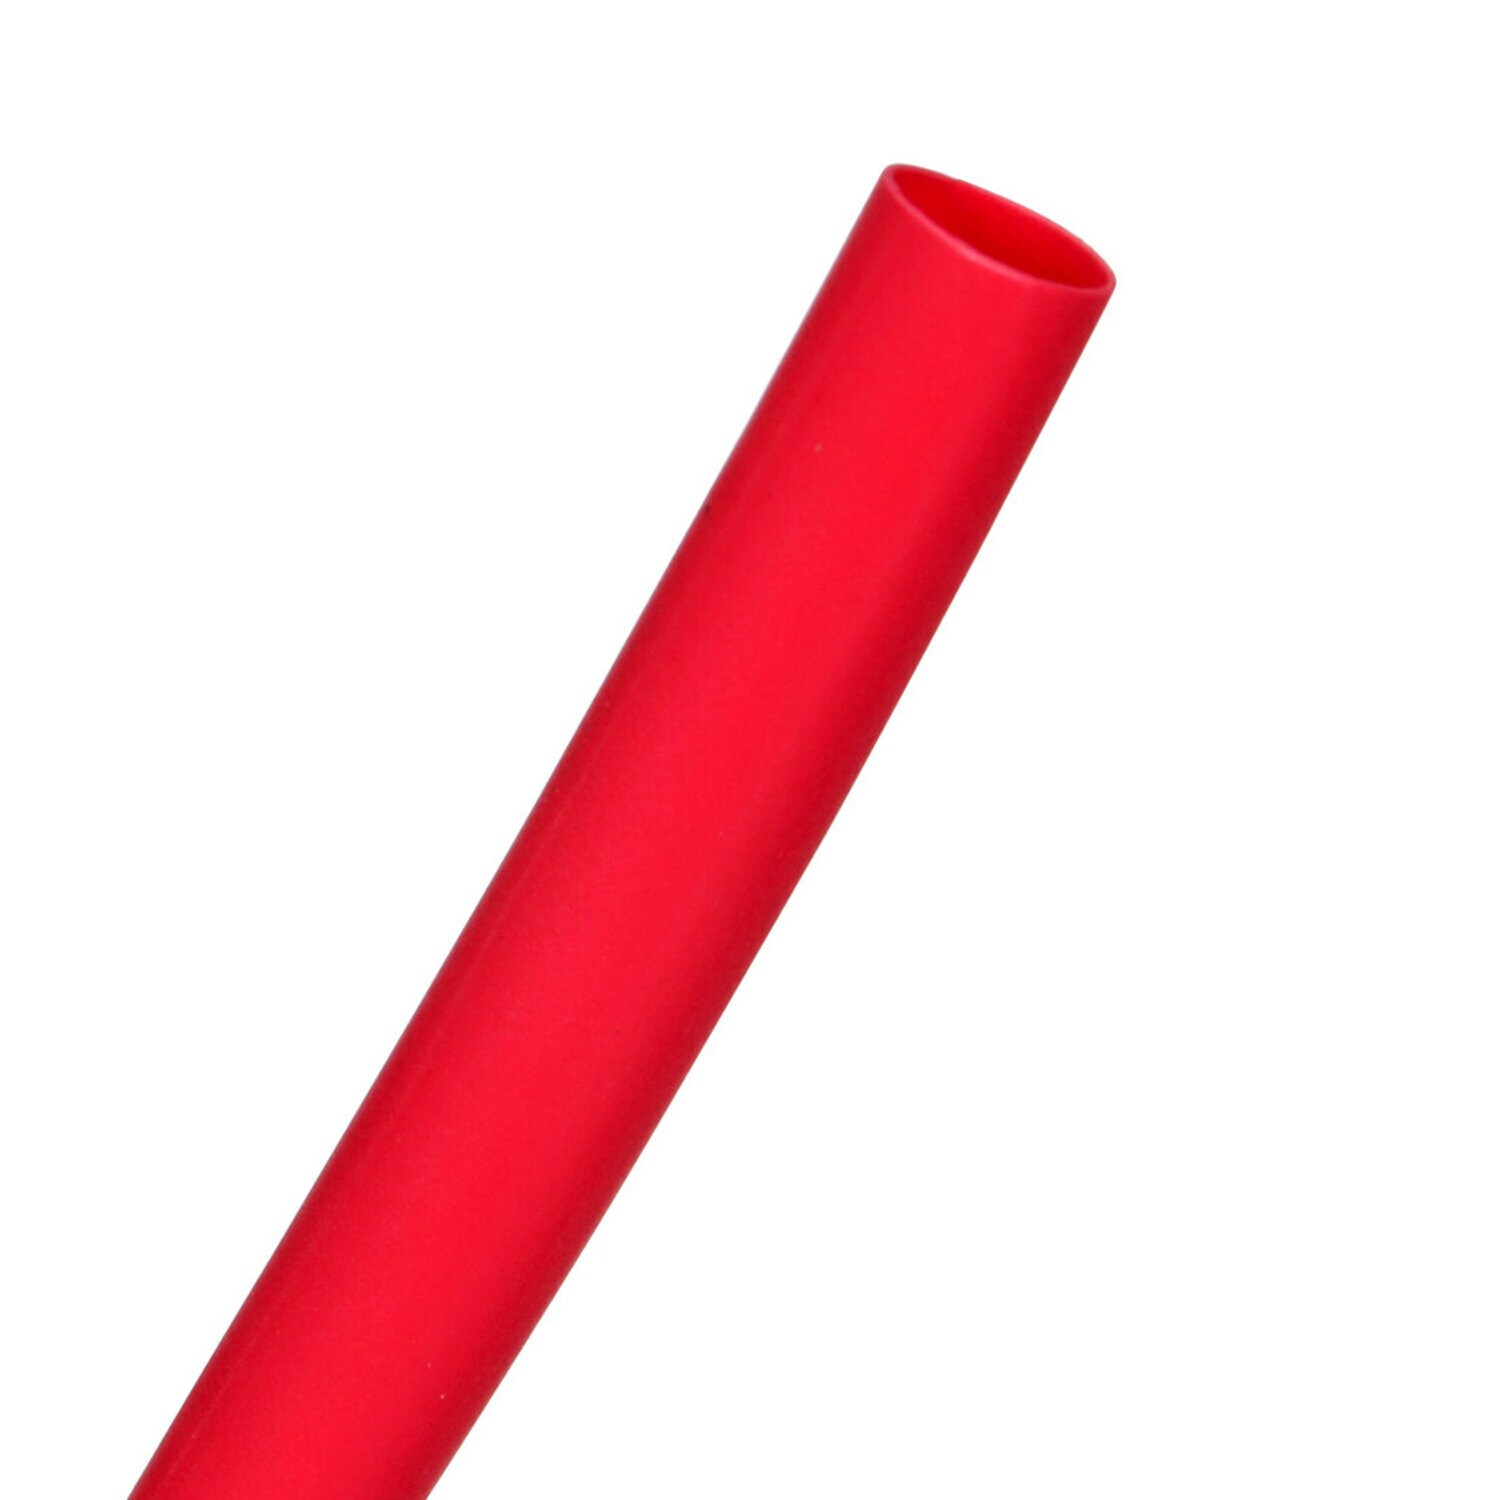 7010349732 - 3M Heat Shrink Thin-Wall Tubing FP-301-1/8-Red-500`: 1000 ft spool
length, 1500 ft/case